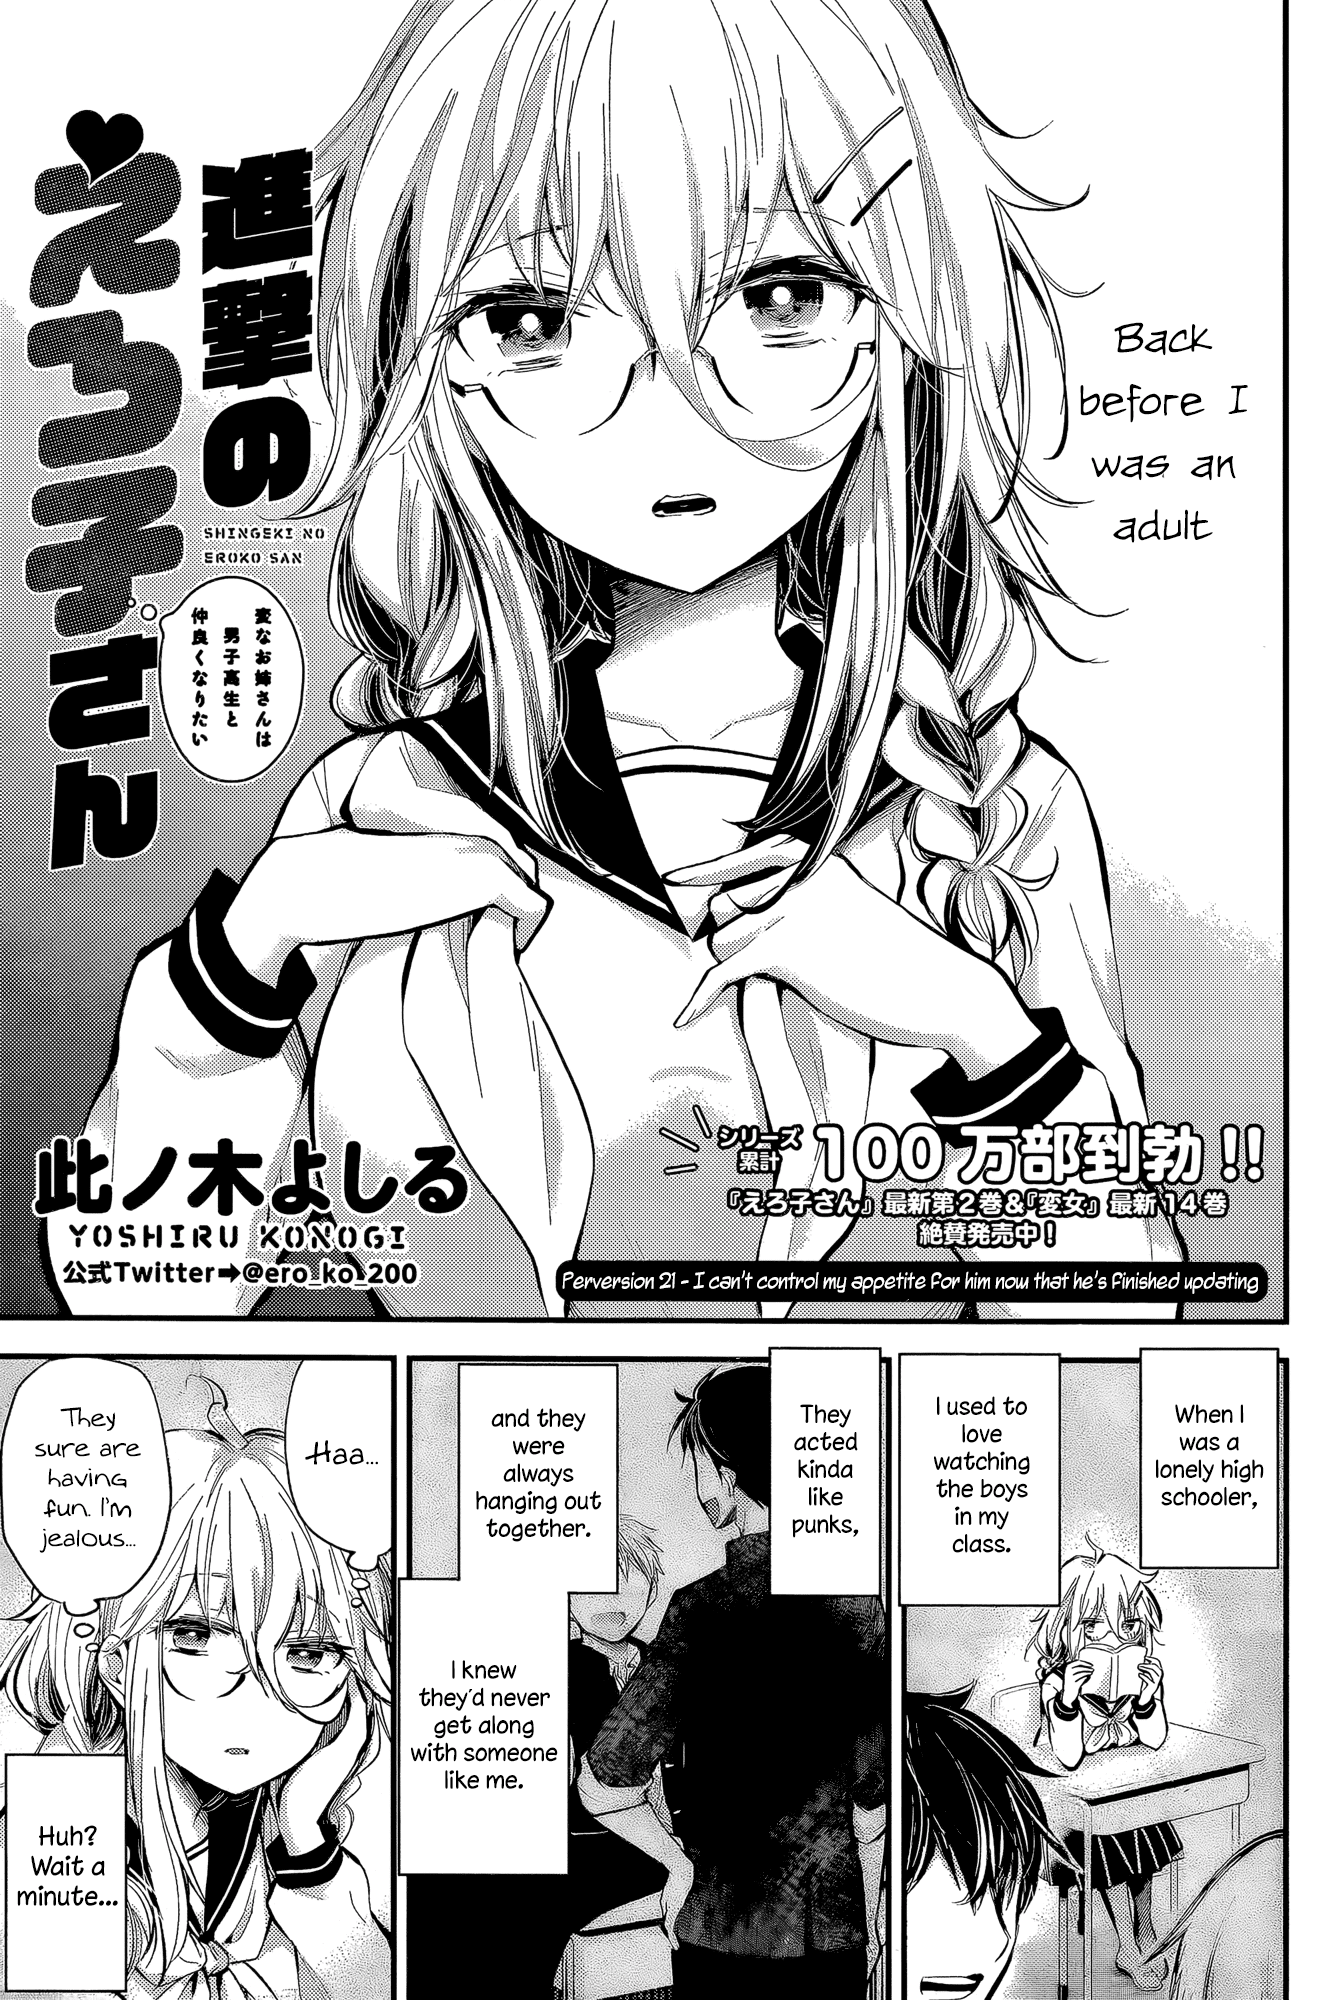 Shingeki No Eroko-San Chapter 21: Perversion 21: I Can’T Control My Appetite For Him Now That He’S Finished Updating - Picture 1